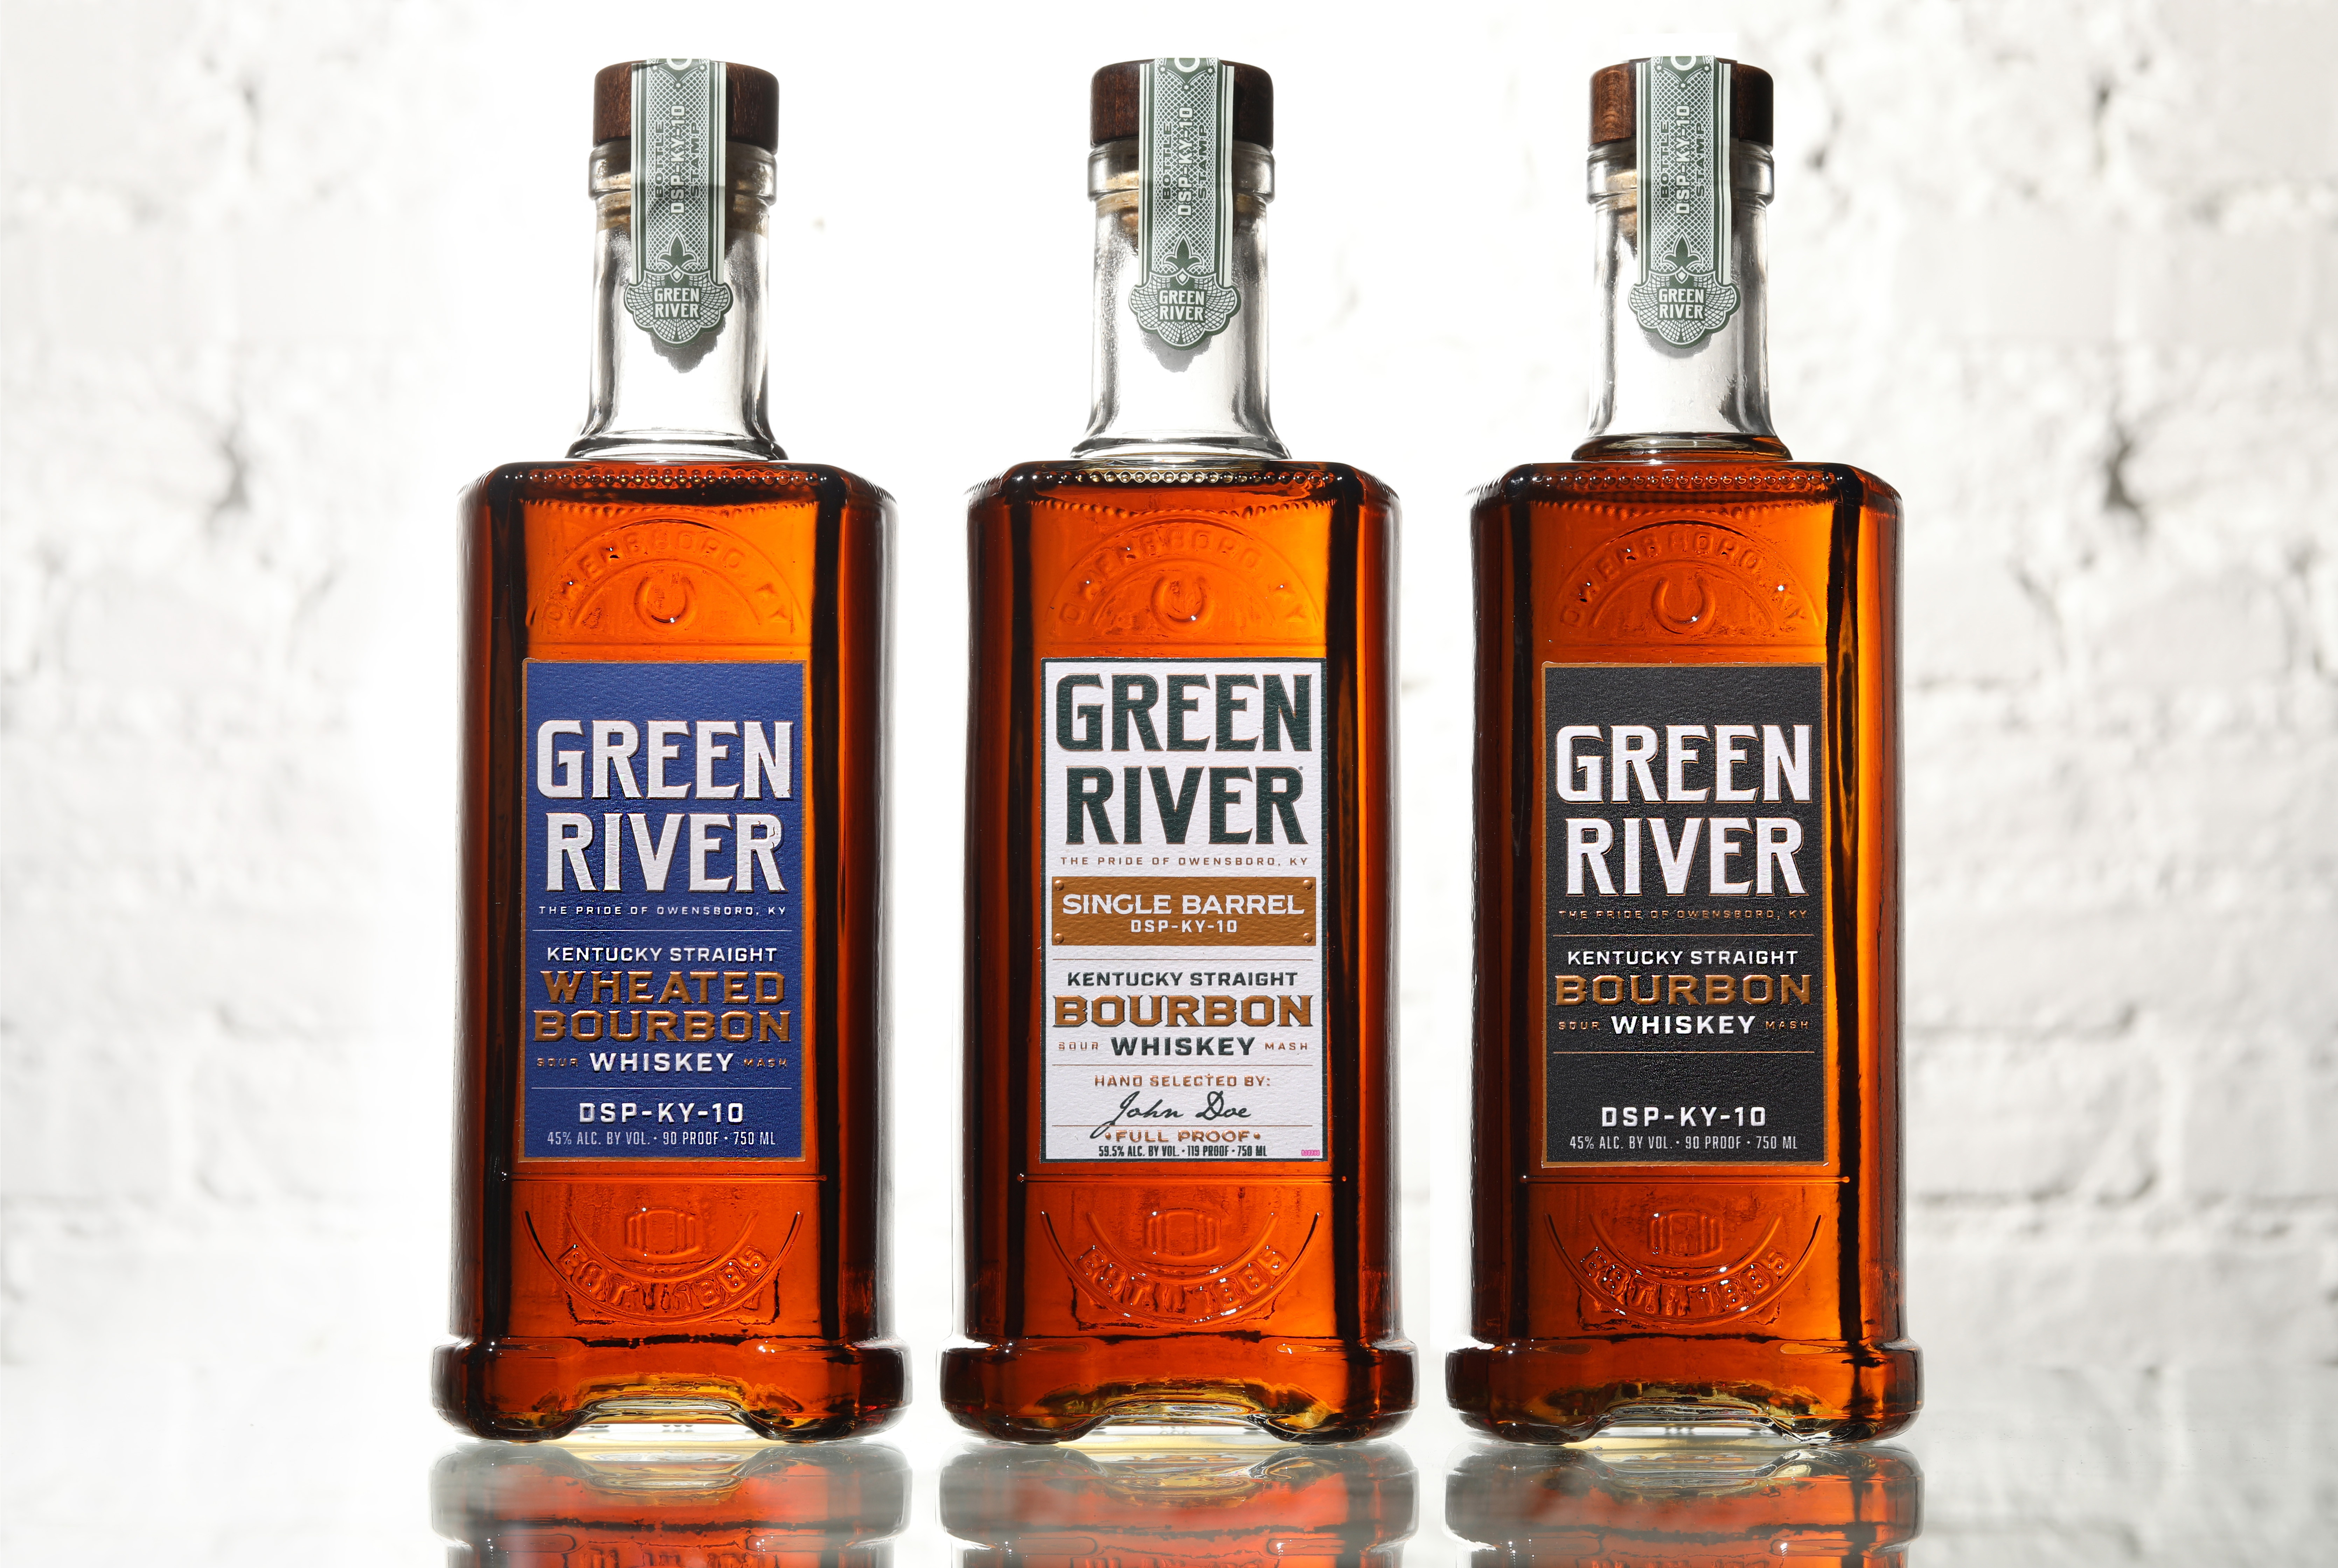 New Bourbon Releases Announced by Green River Distilling Co.